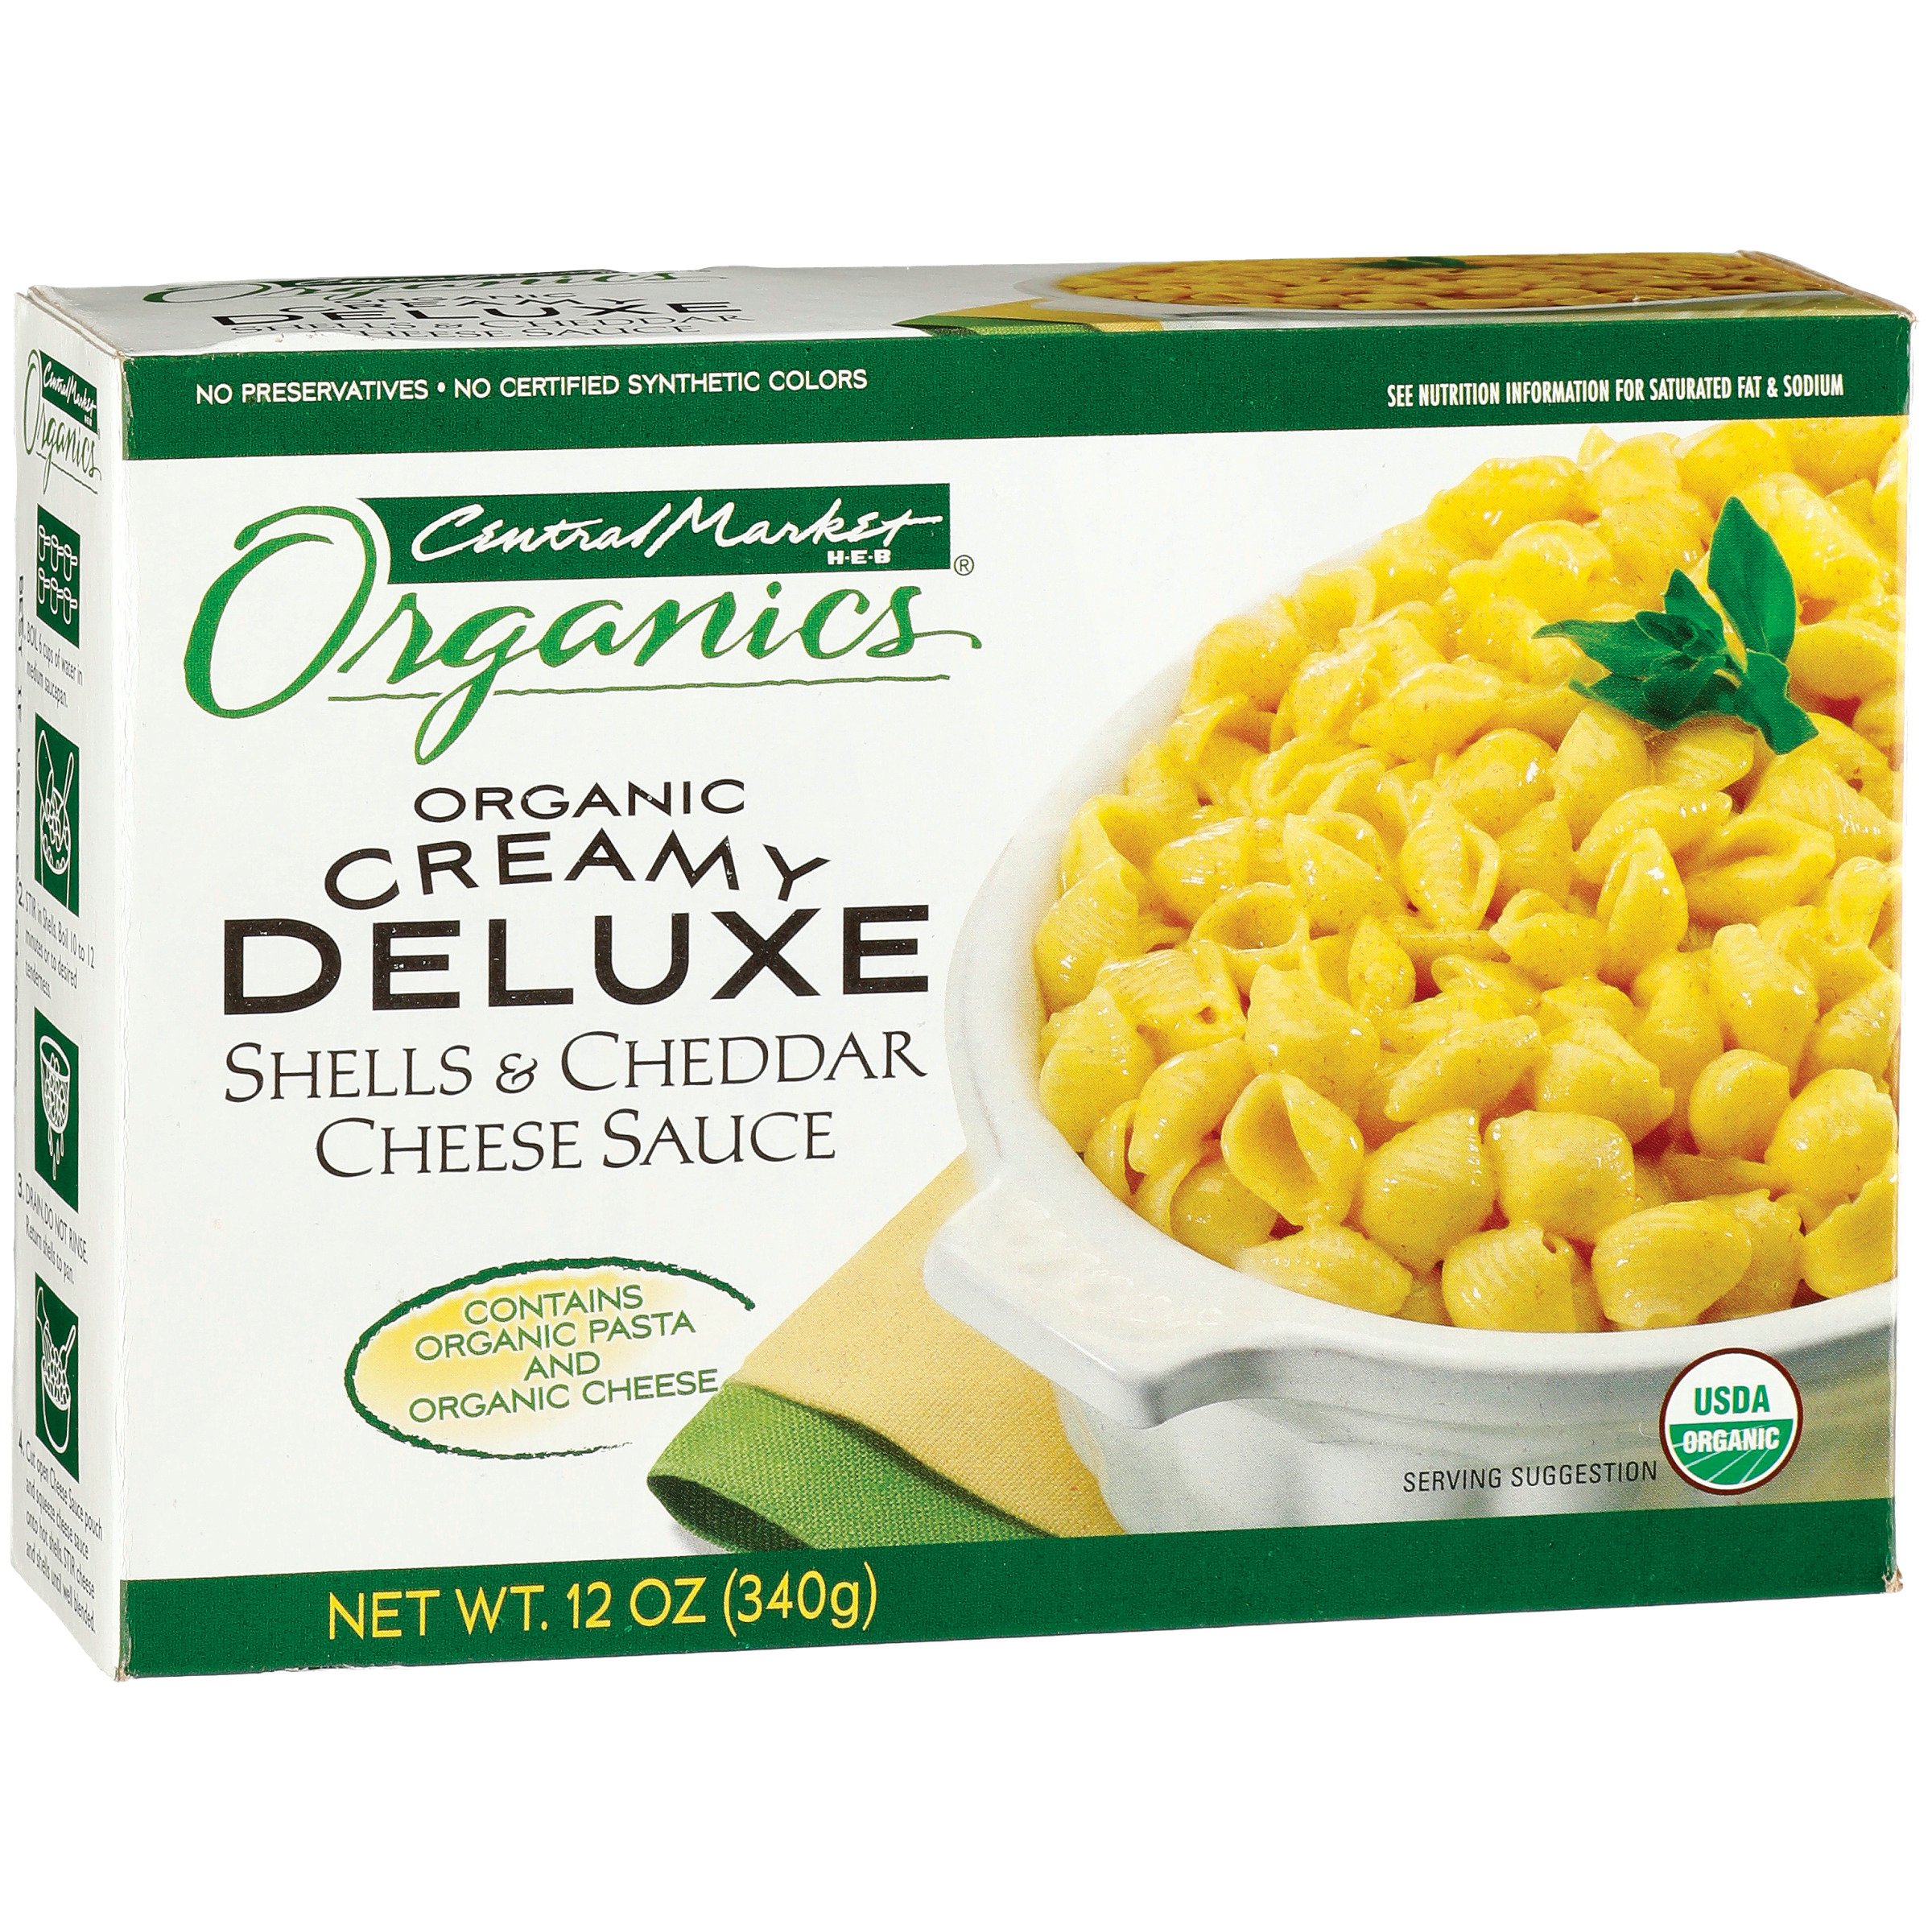 Deluxe Rich & Creamy Shells and White Cheddar